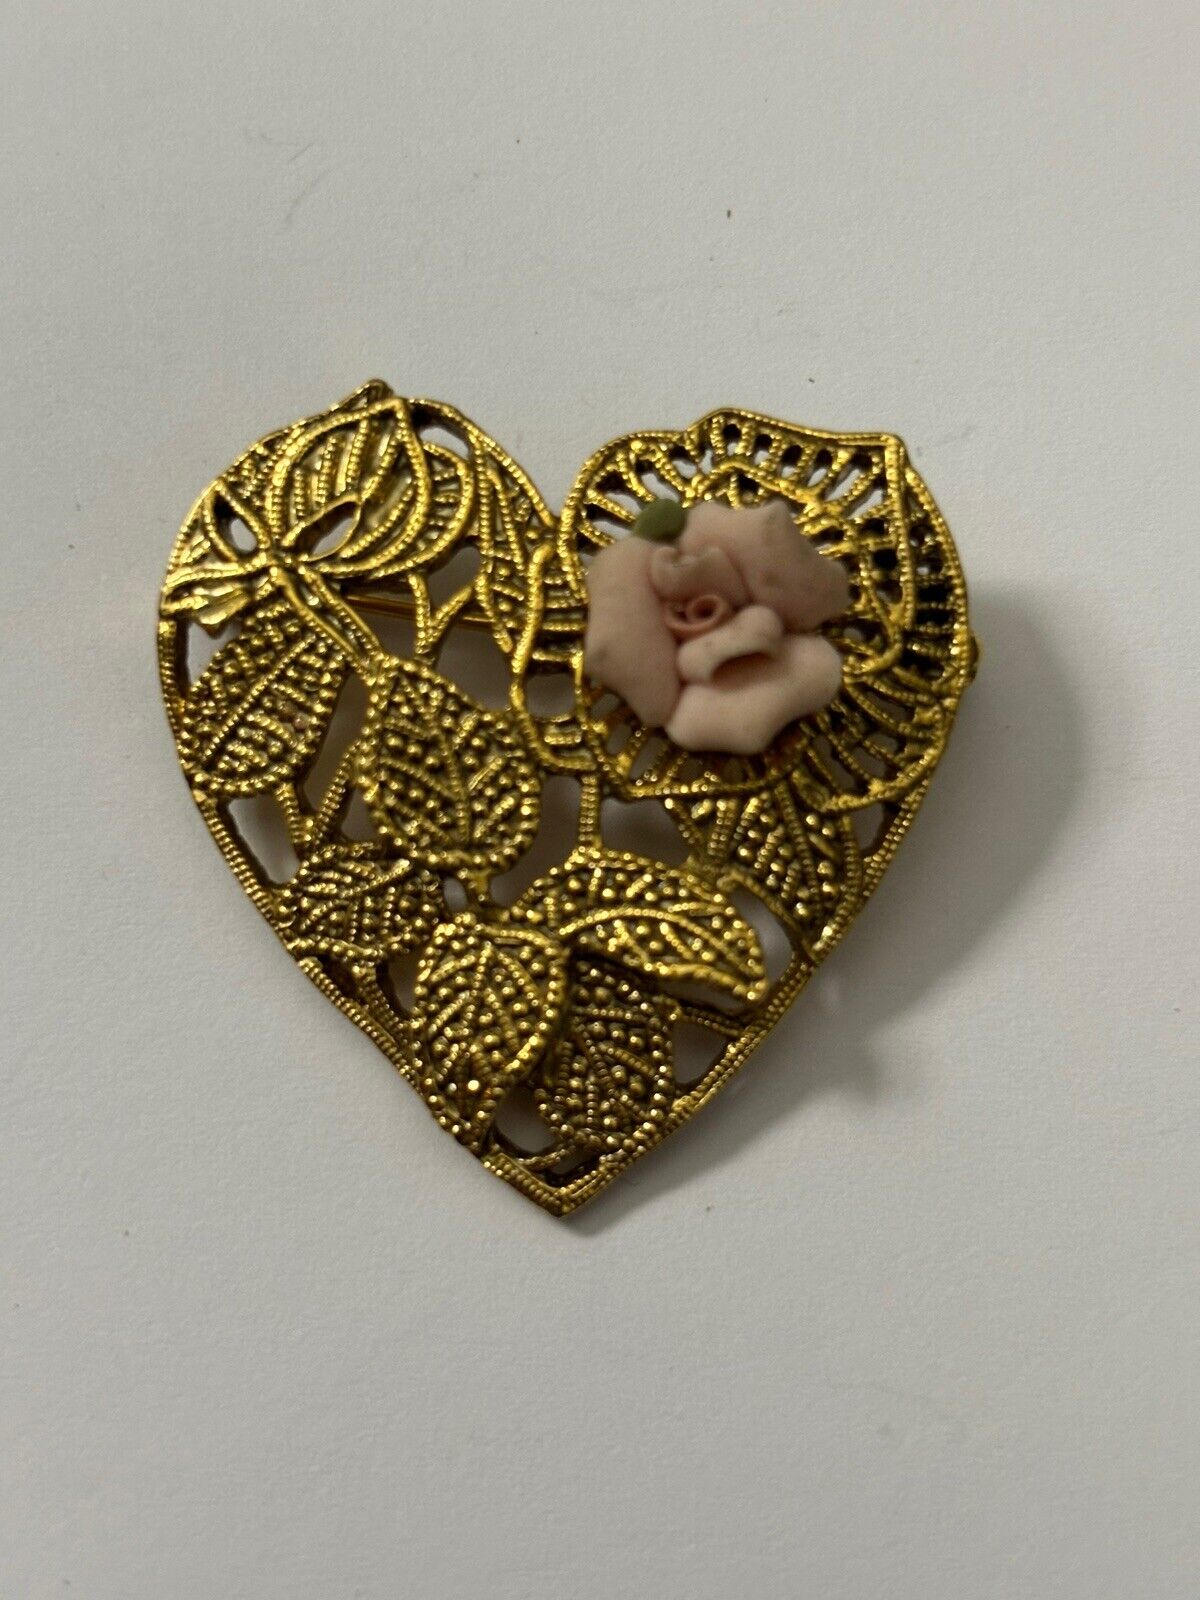 Vintage 1928 Jewelry Heart Brooch with Pink Rose Gold Tone